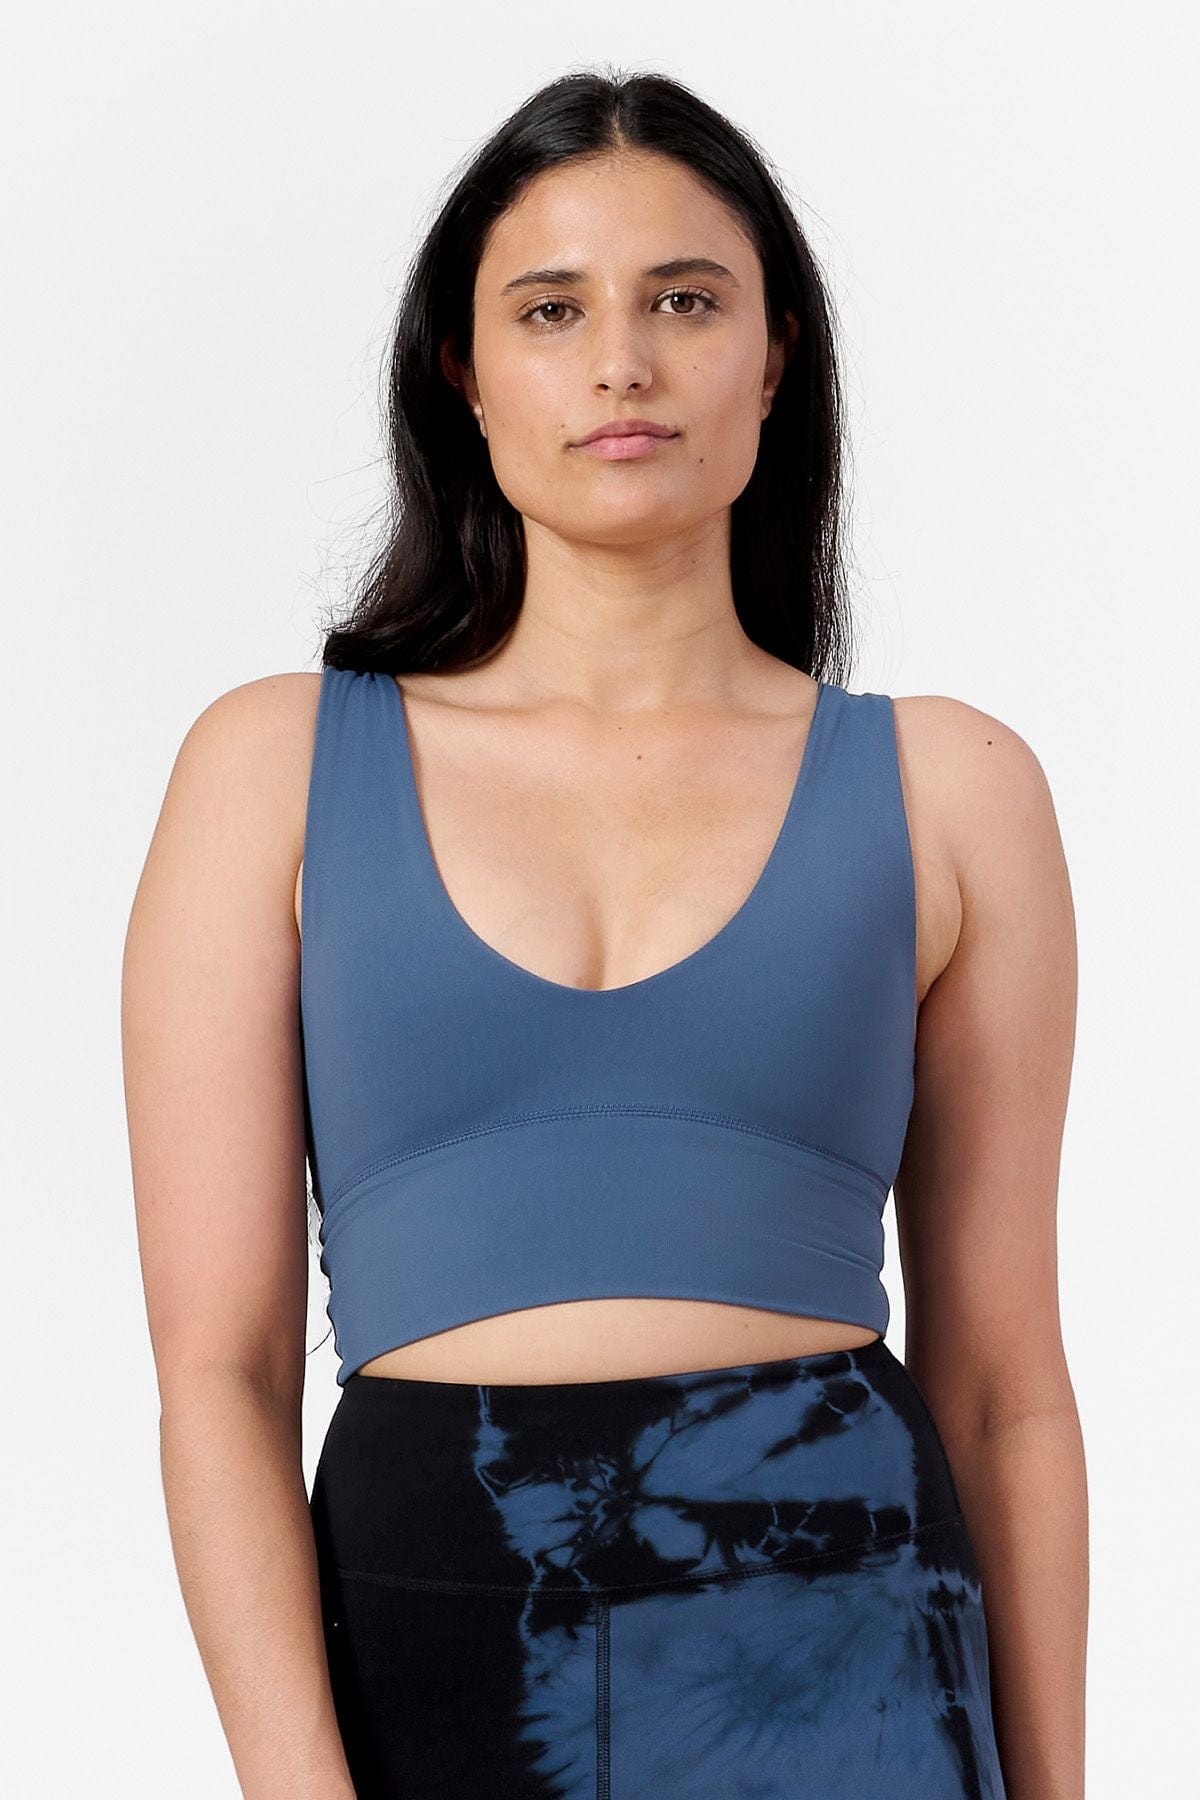  a woman wearing a low cut crop top in blue with tie dye blue and black leggings